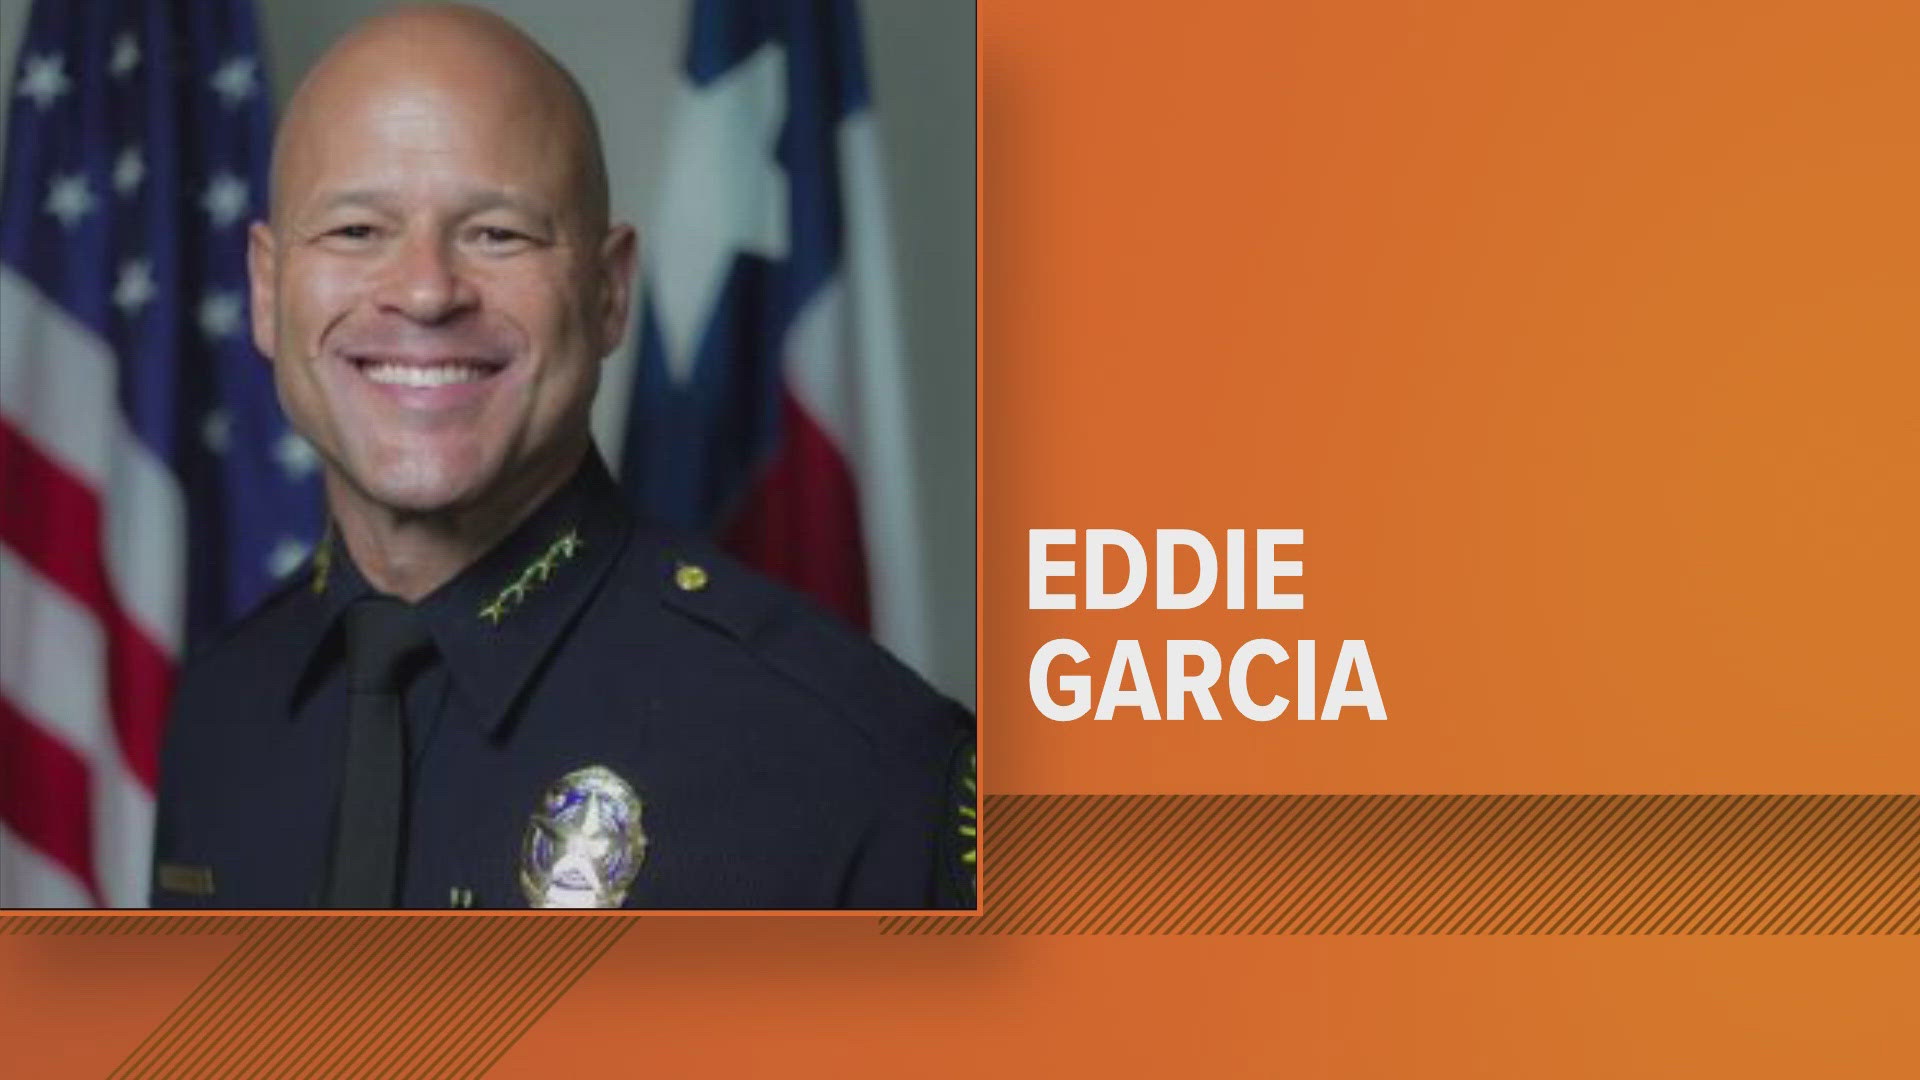 Garcia will remain in Dallas for the next three years as the search in Austin continues.